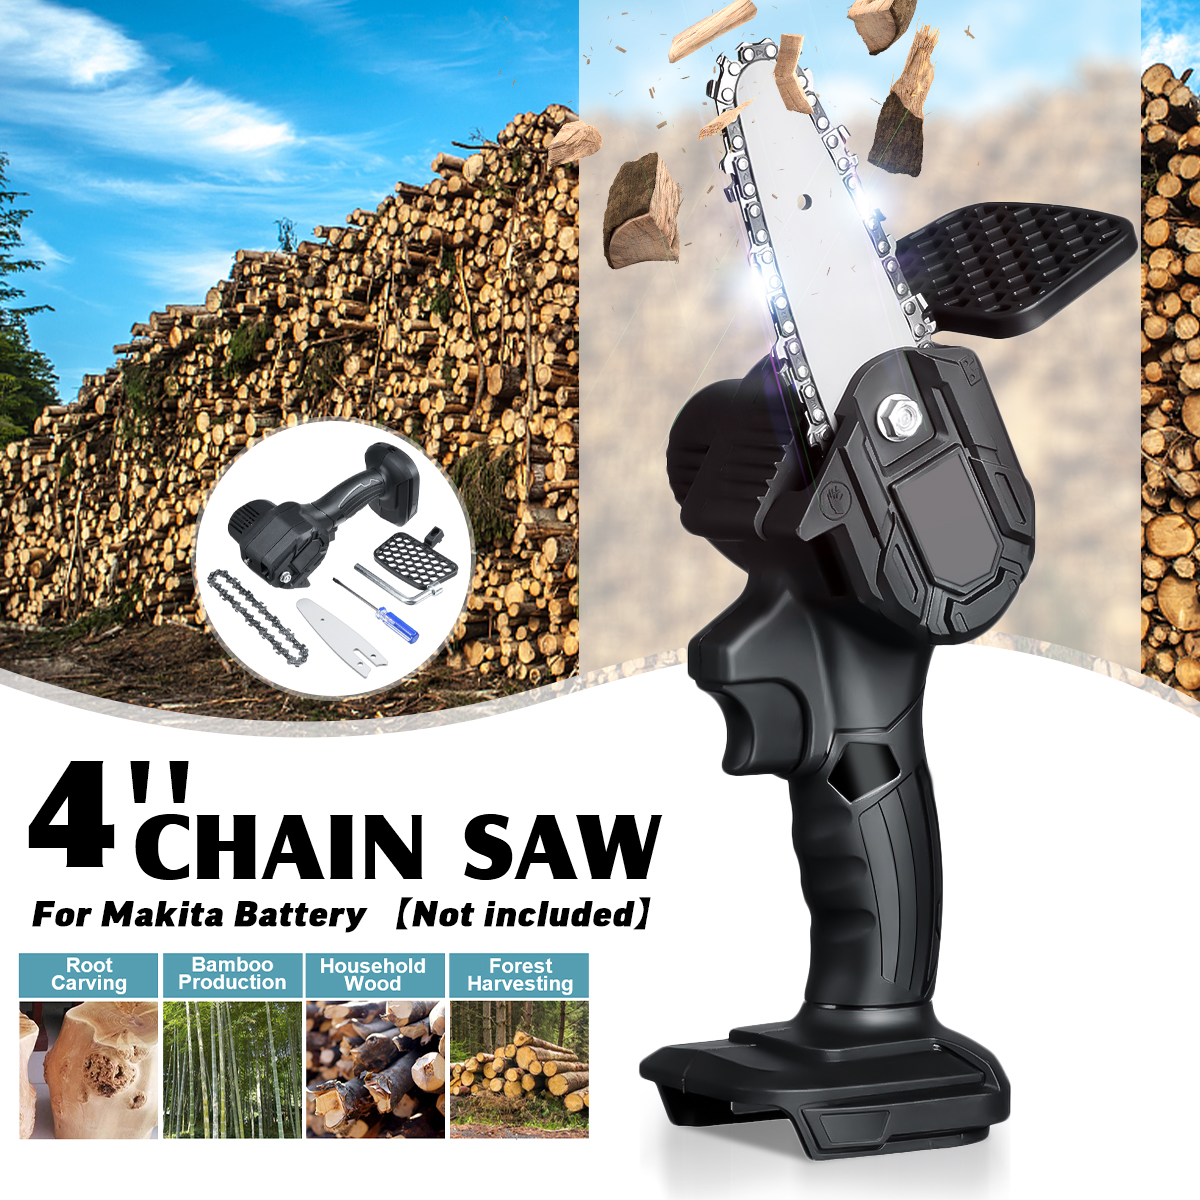 4-Inch-Electric-Chain-Saw-Blade-Guide-Pruning-Saw-Fit-For-Makita-18V21V-Battery-1804791-2